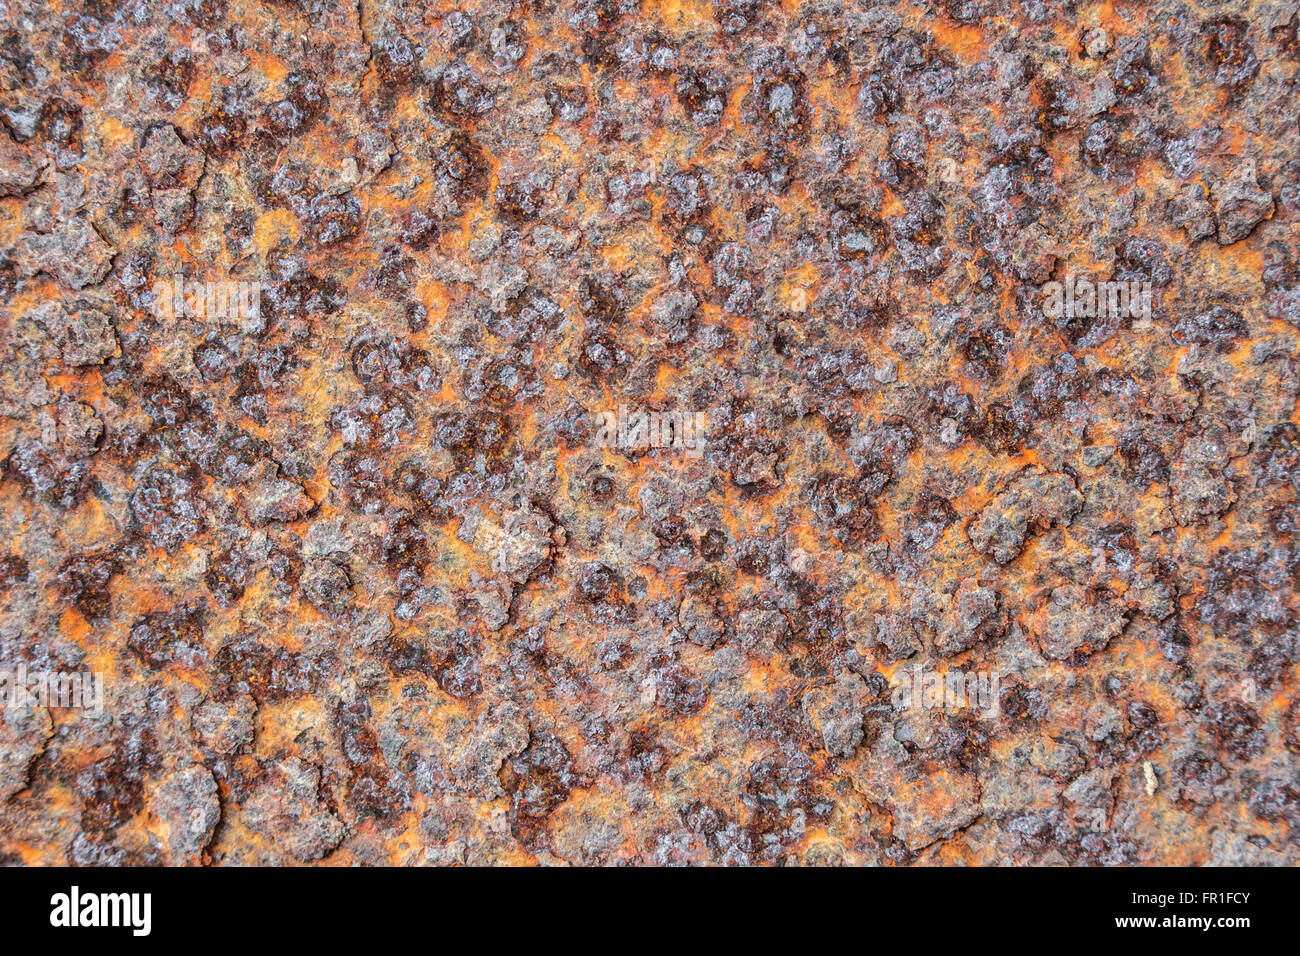 Rust on metal surfaces Stock Photo